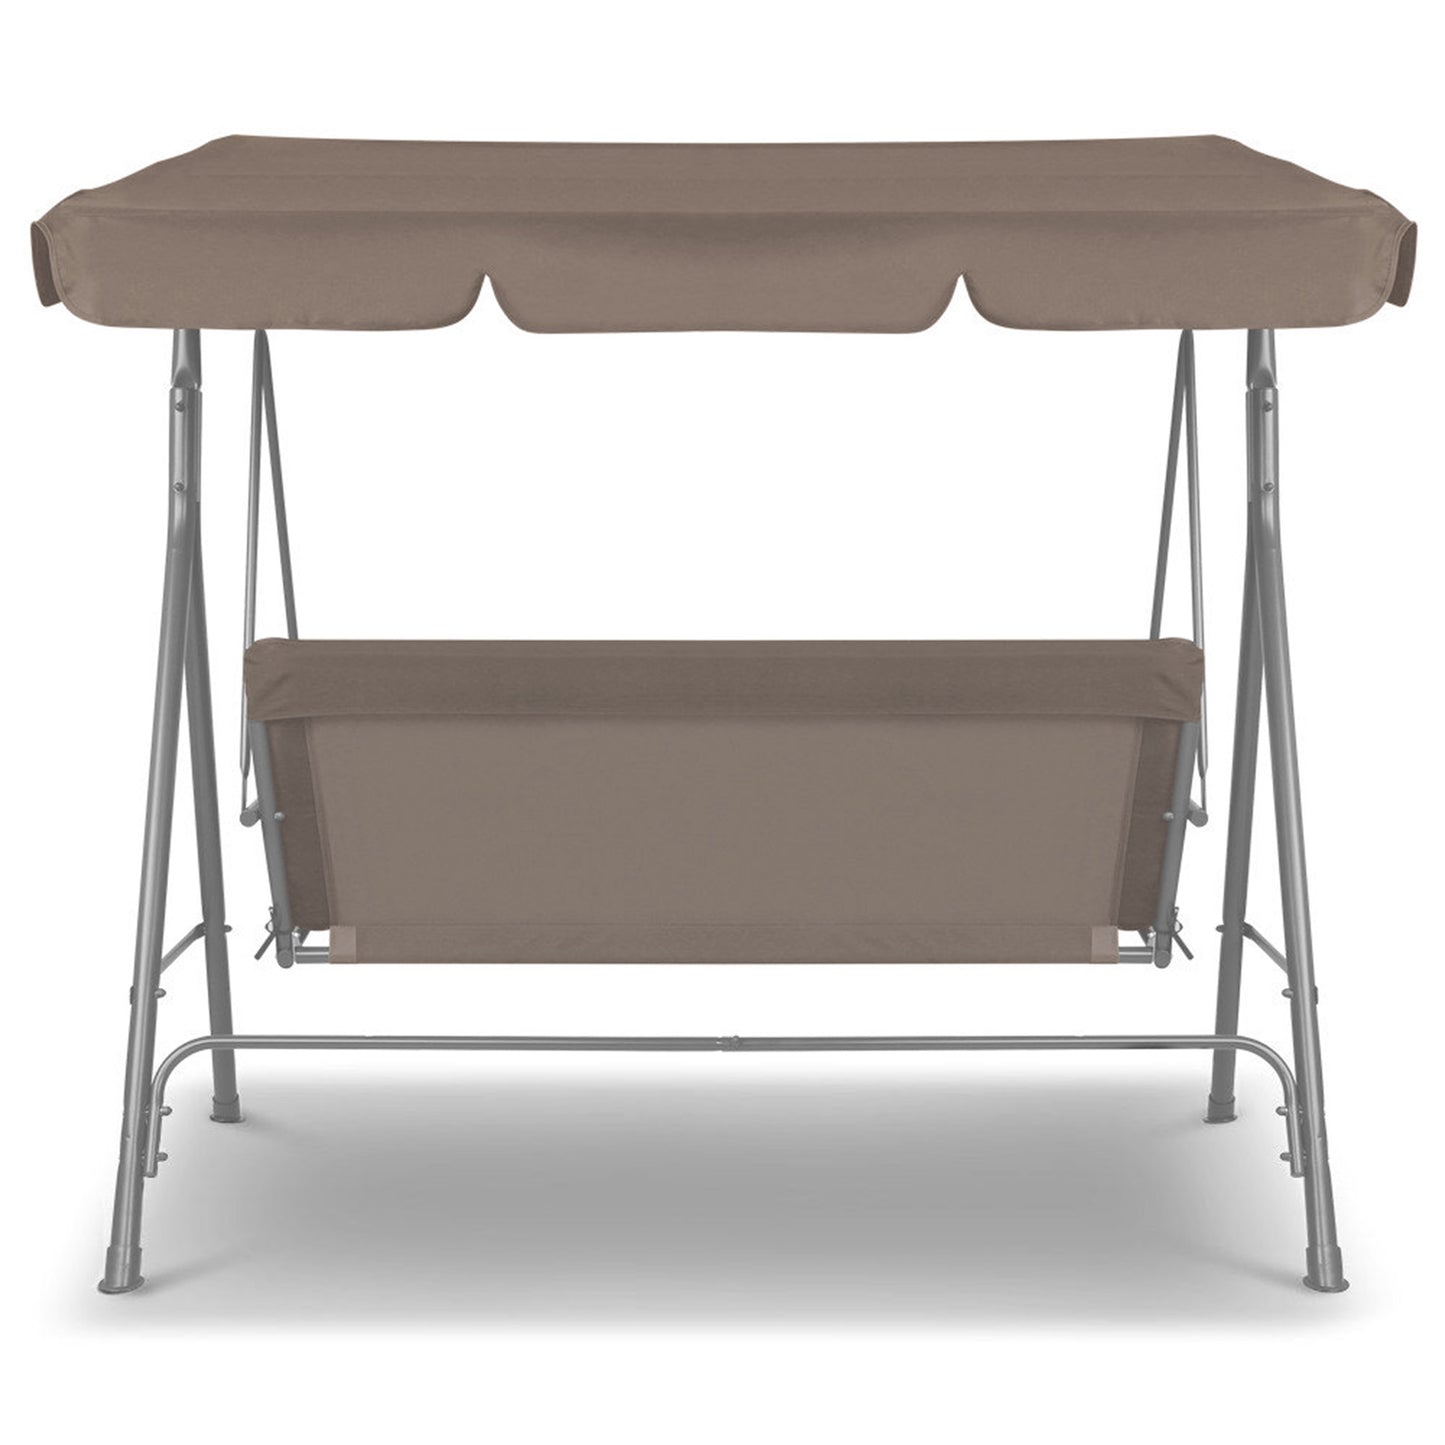 Milano Outdoor Swing Bench Seat Chair Canopy Furniture 3 Seater Garden Hammock - Coffee - image5